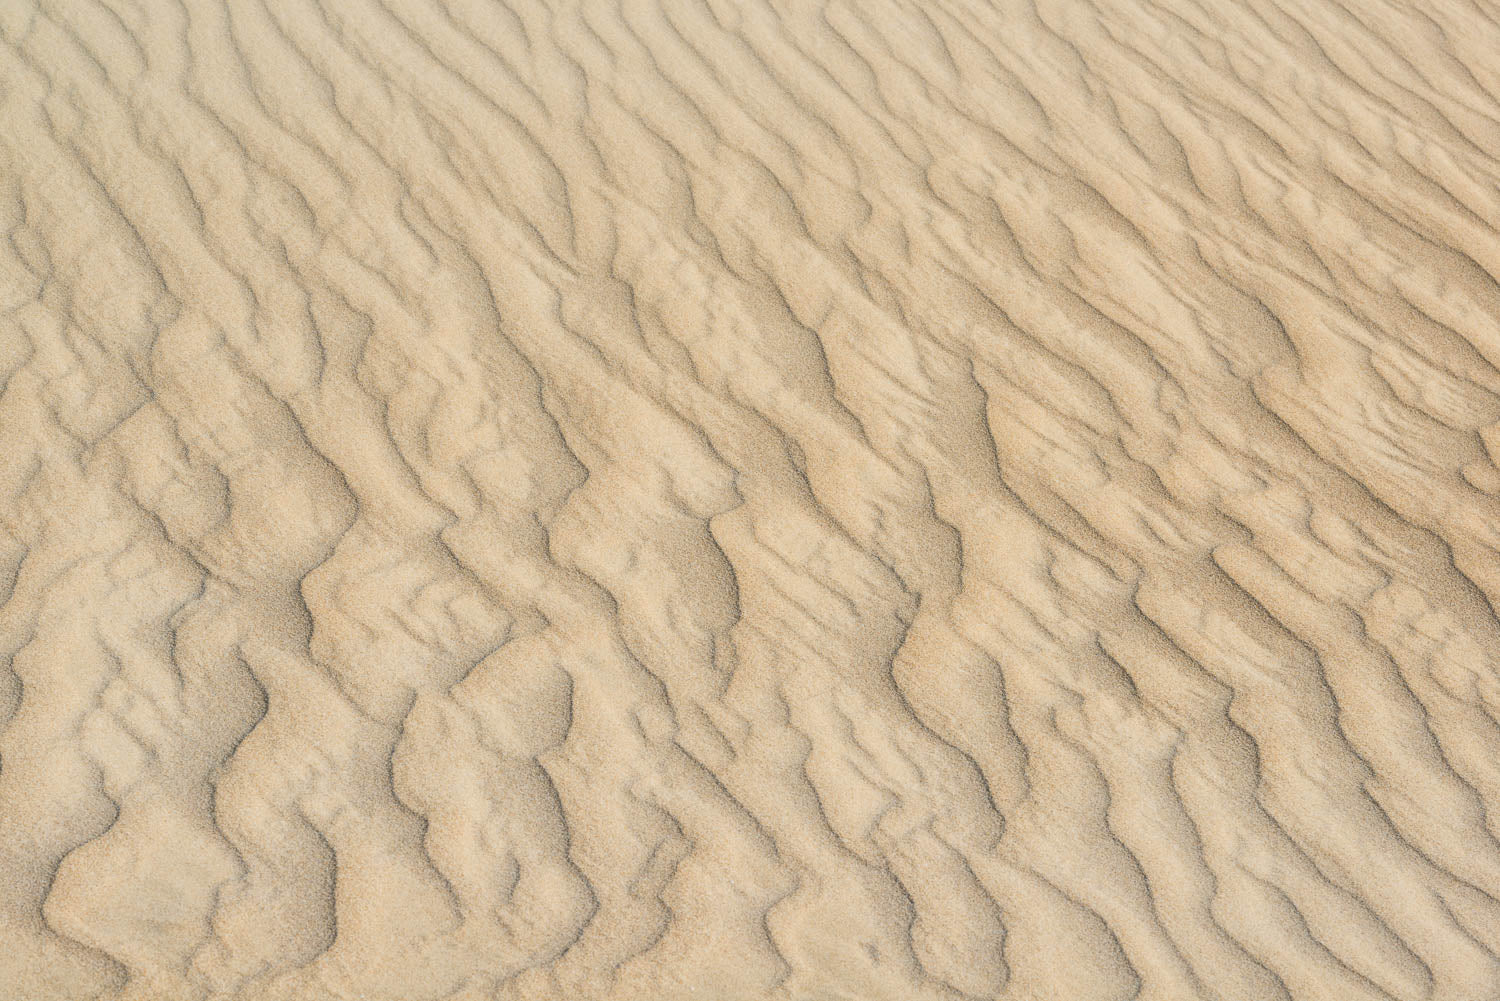 A desert with a texture of many small cracks and waves of sand, Eyre Peninsula #4